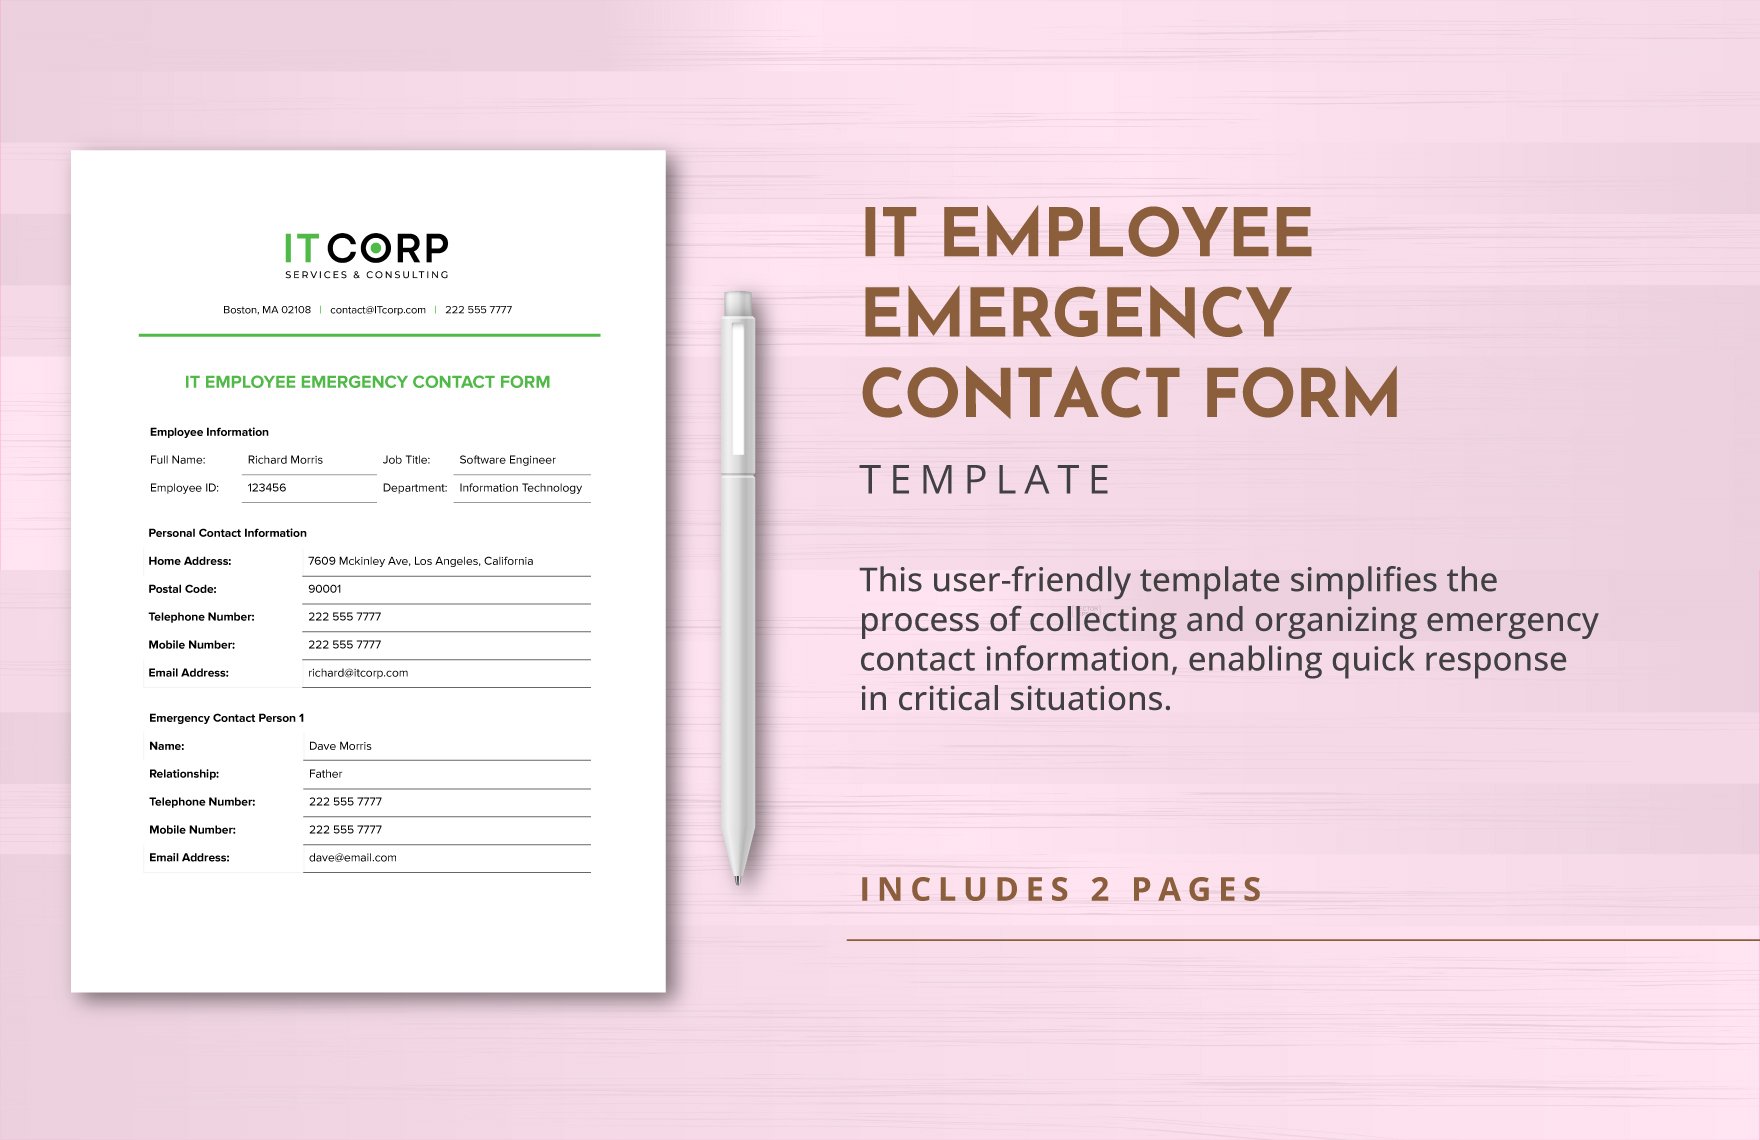 IT Employee Emergency Contact Form Template